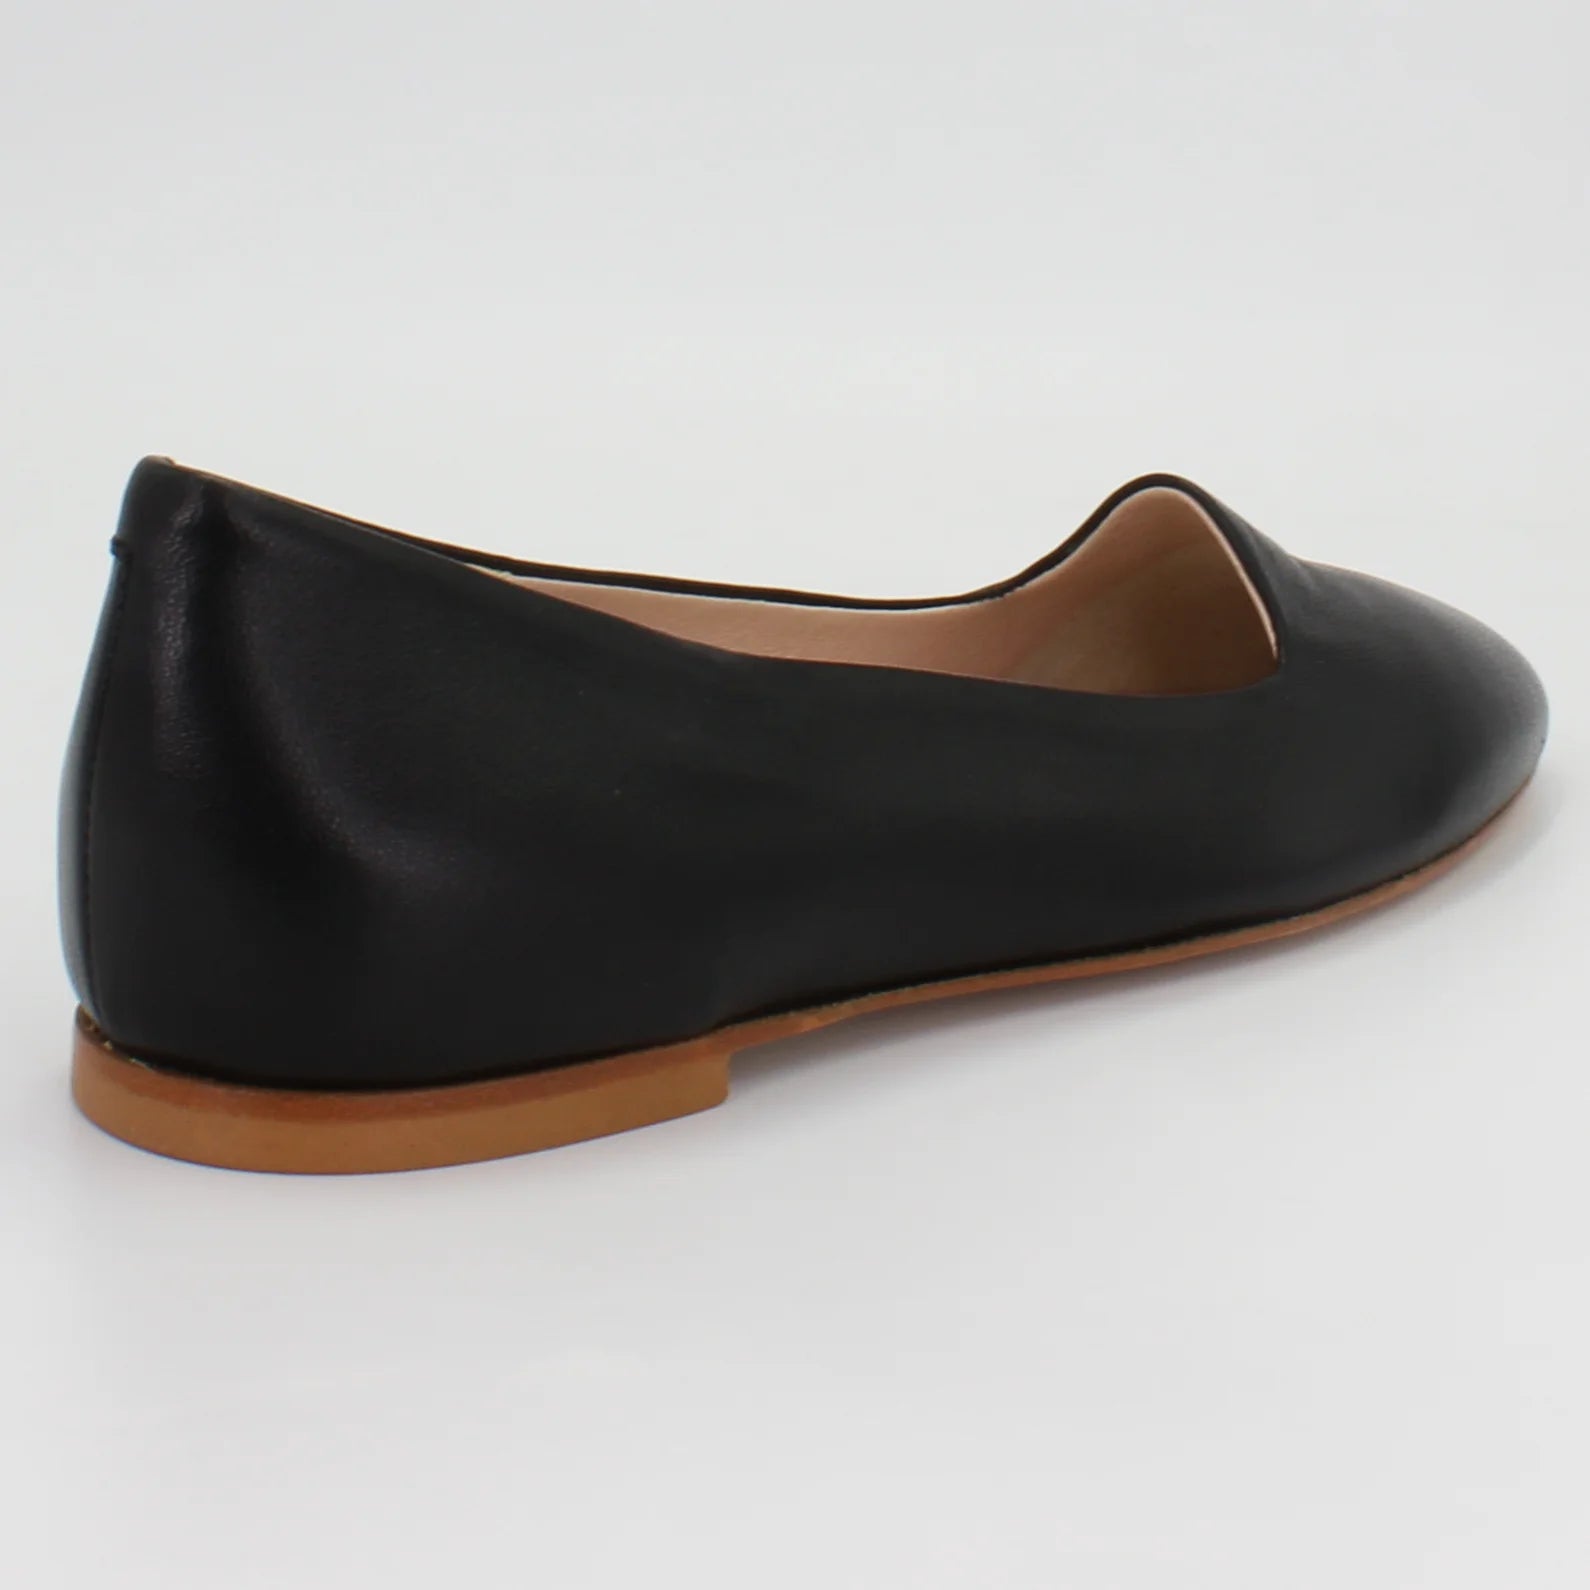 Shop Handmade Italian Leather pump in nappa nero (E364) or browse our range of hand-made Italian shoes in leather or suede in-store at Aliverti Cape Town, or shop online. We deliver in South Africa & offer multiple payment plans as well as accept multiple safe & secure payment methods.